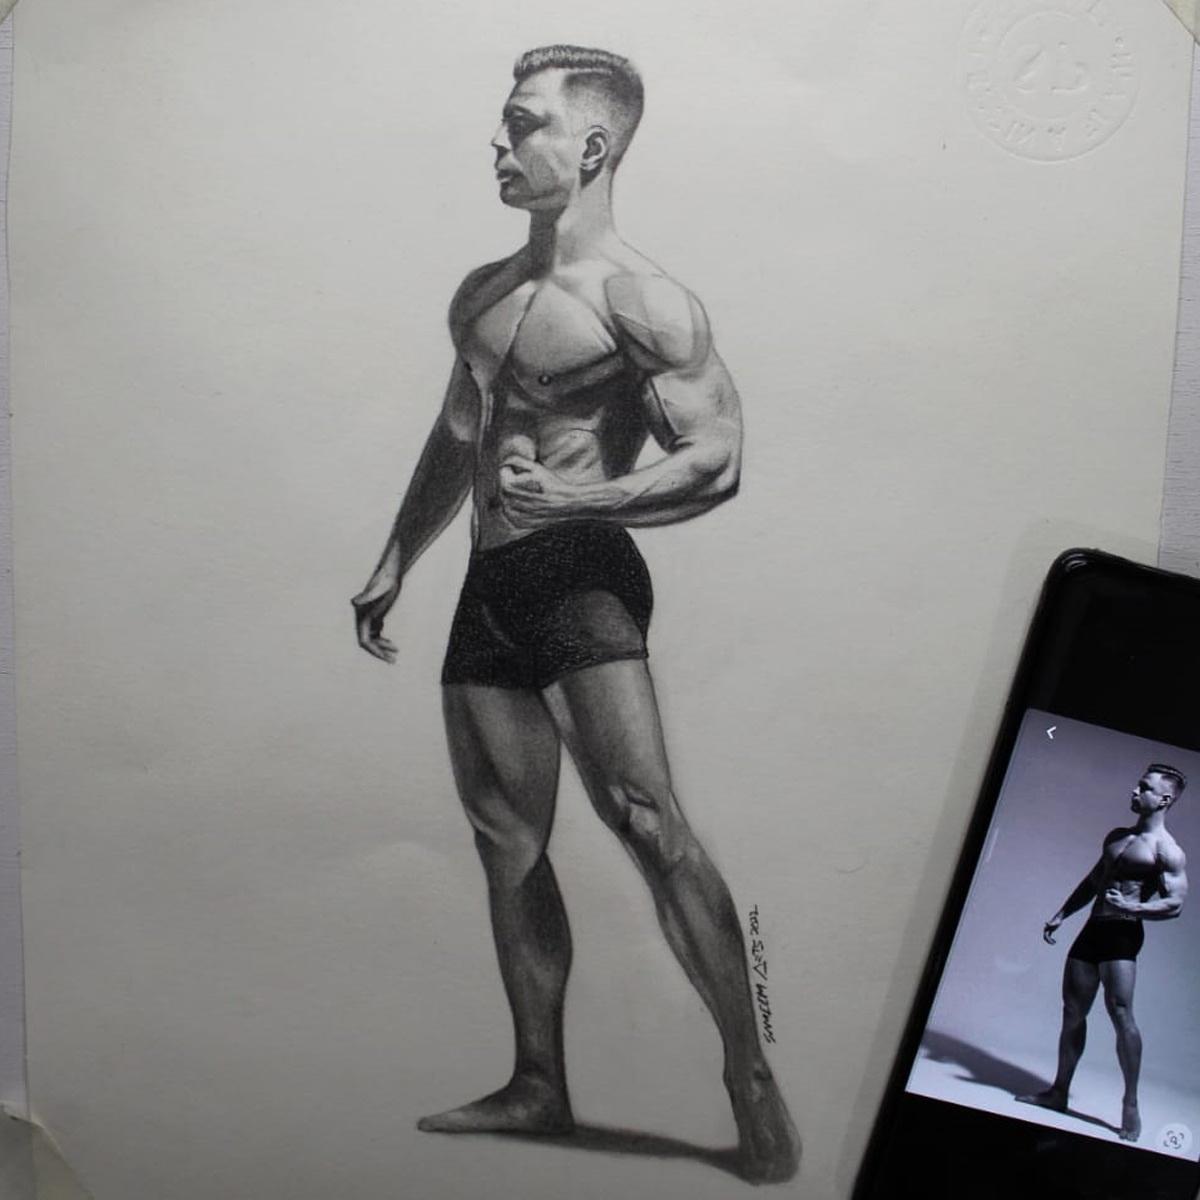 My project in Realistic Human Figure Drawing course